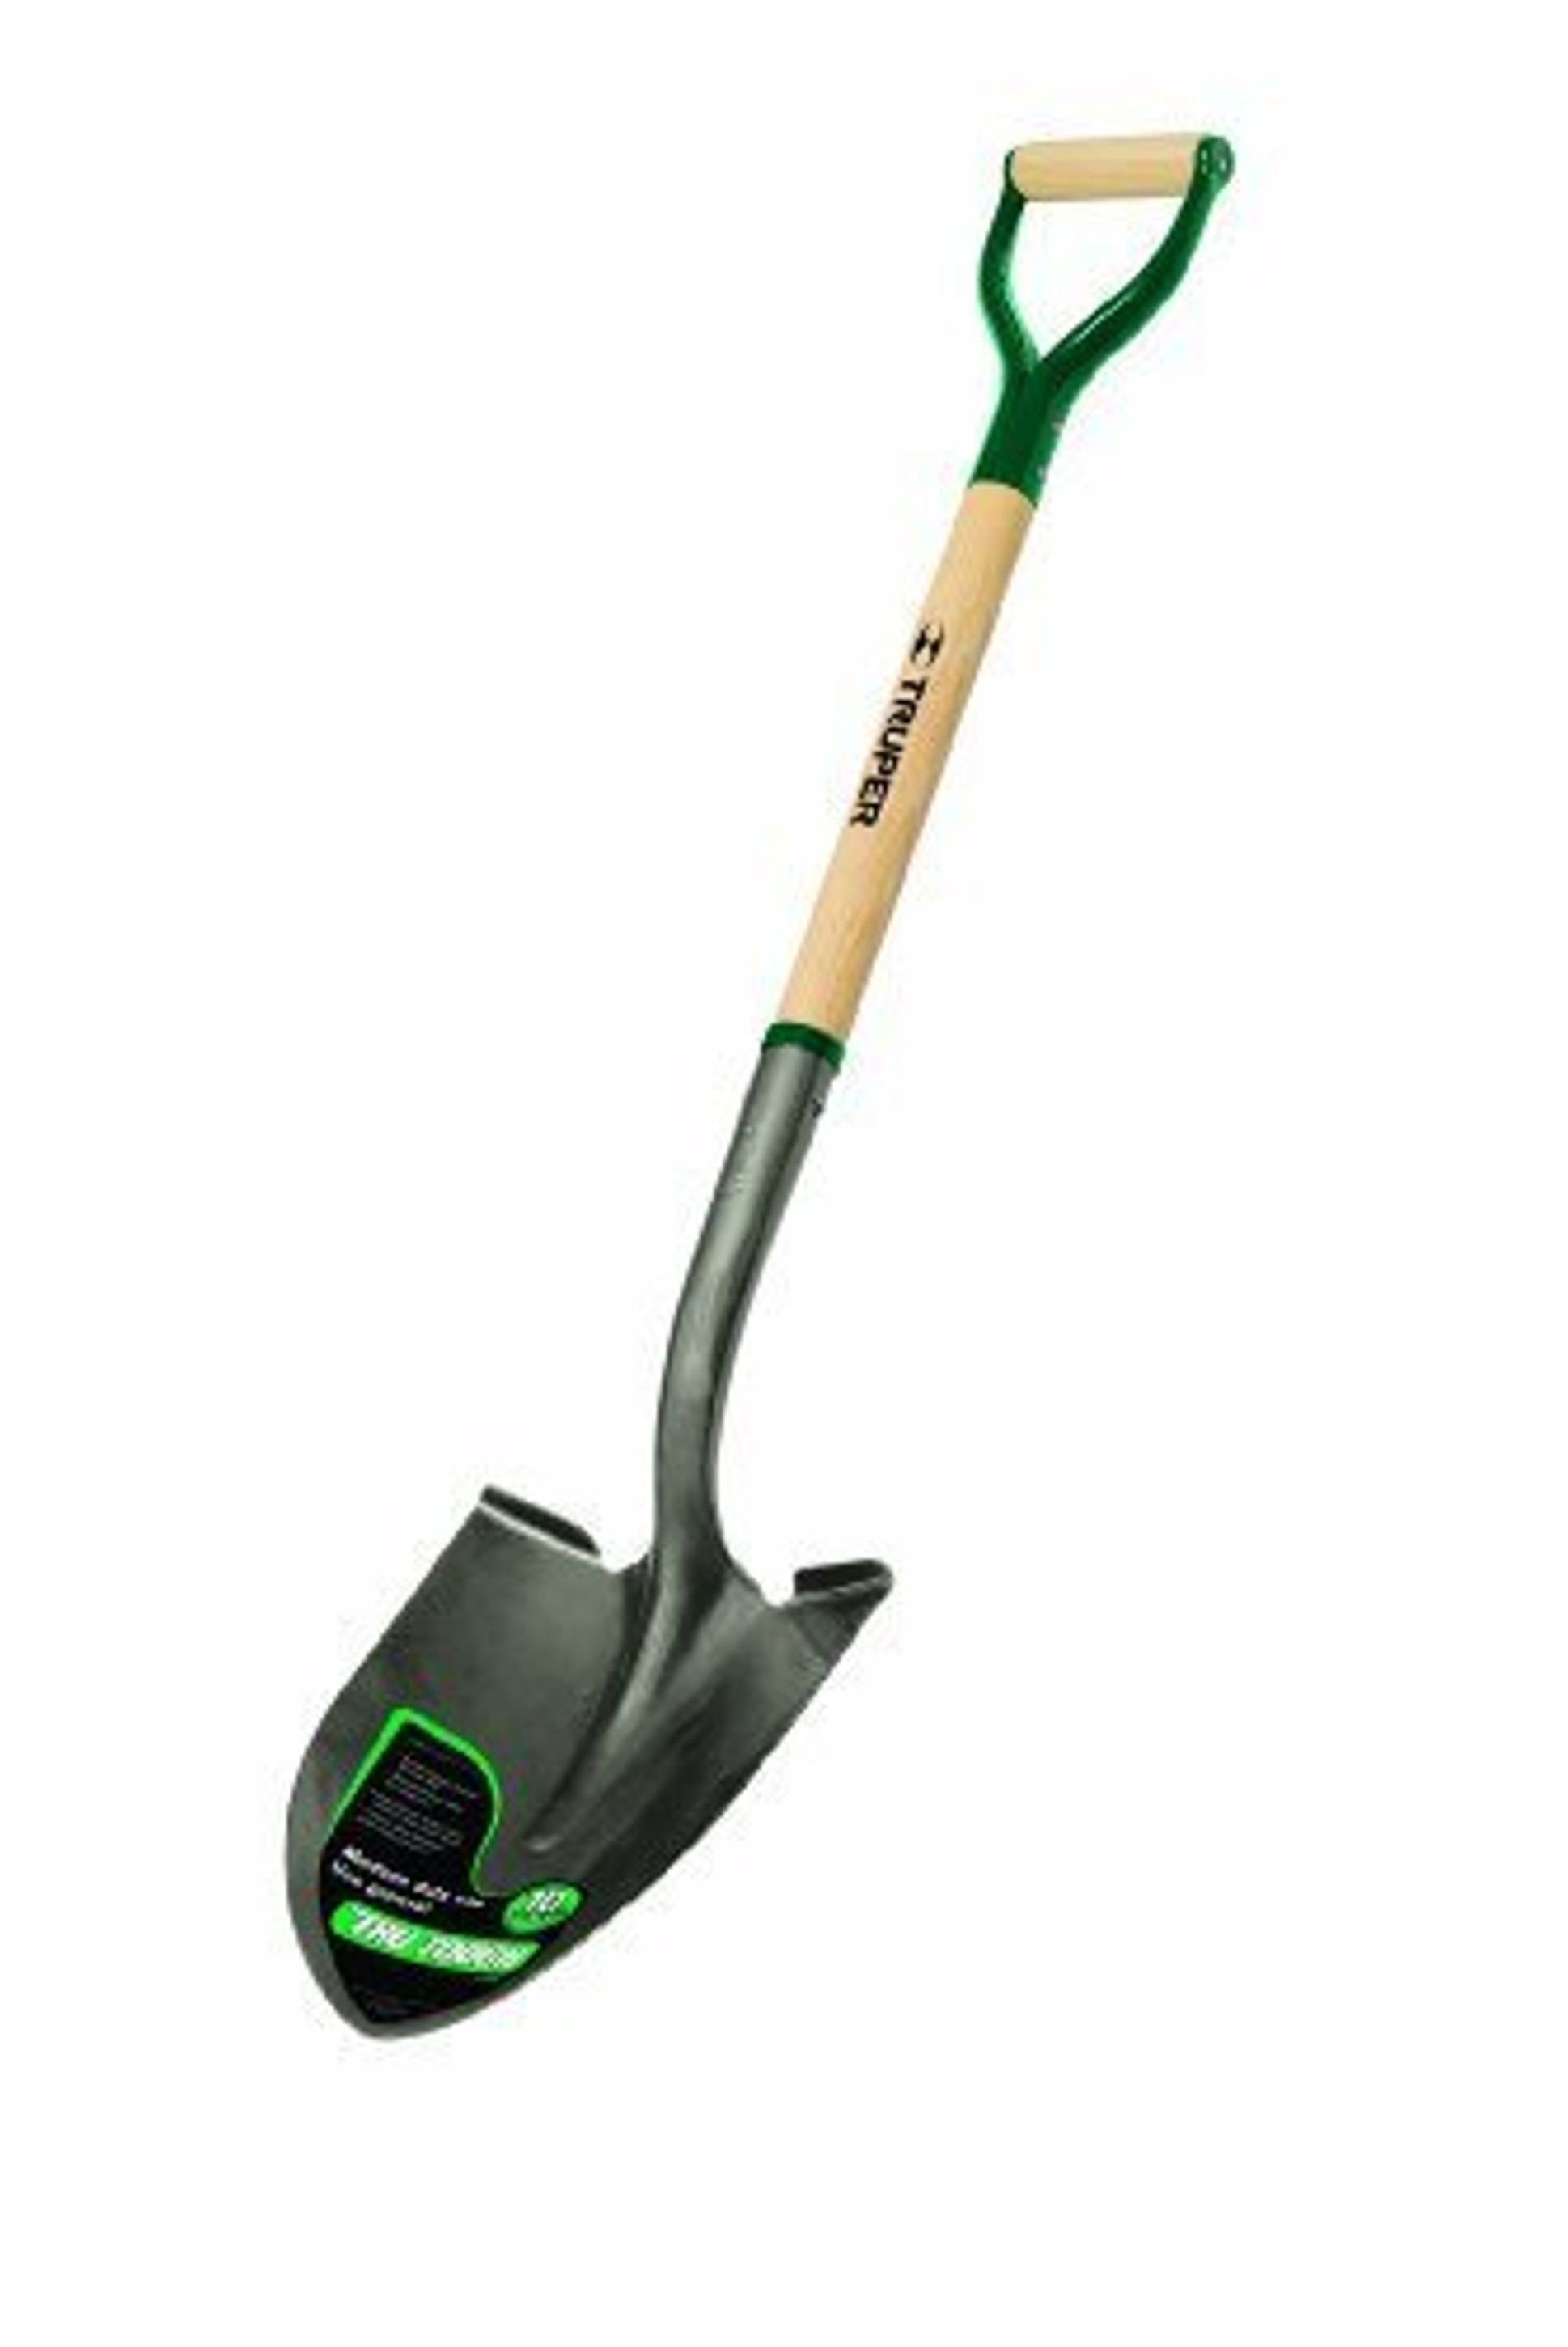 Truper Garden Pro Round Point Shovel with Off-Set Cushioned D-Handle, 30 Inch